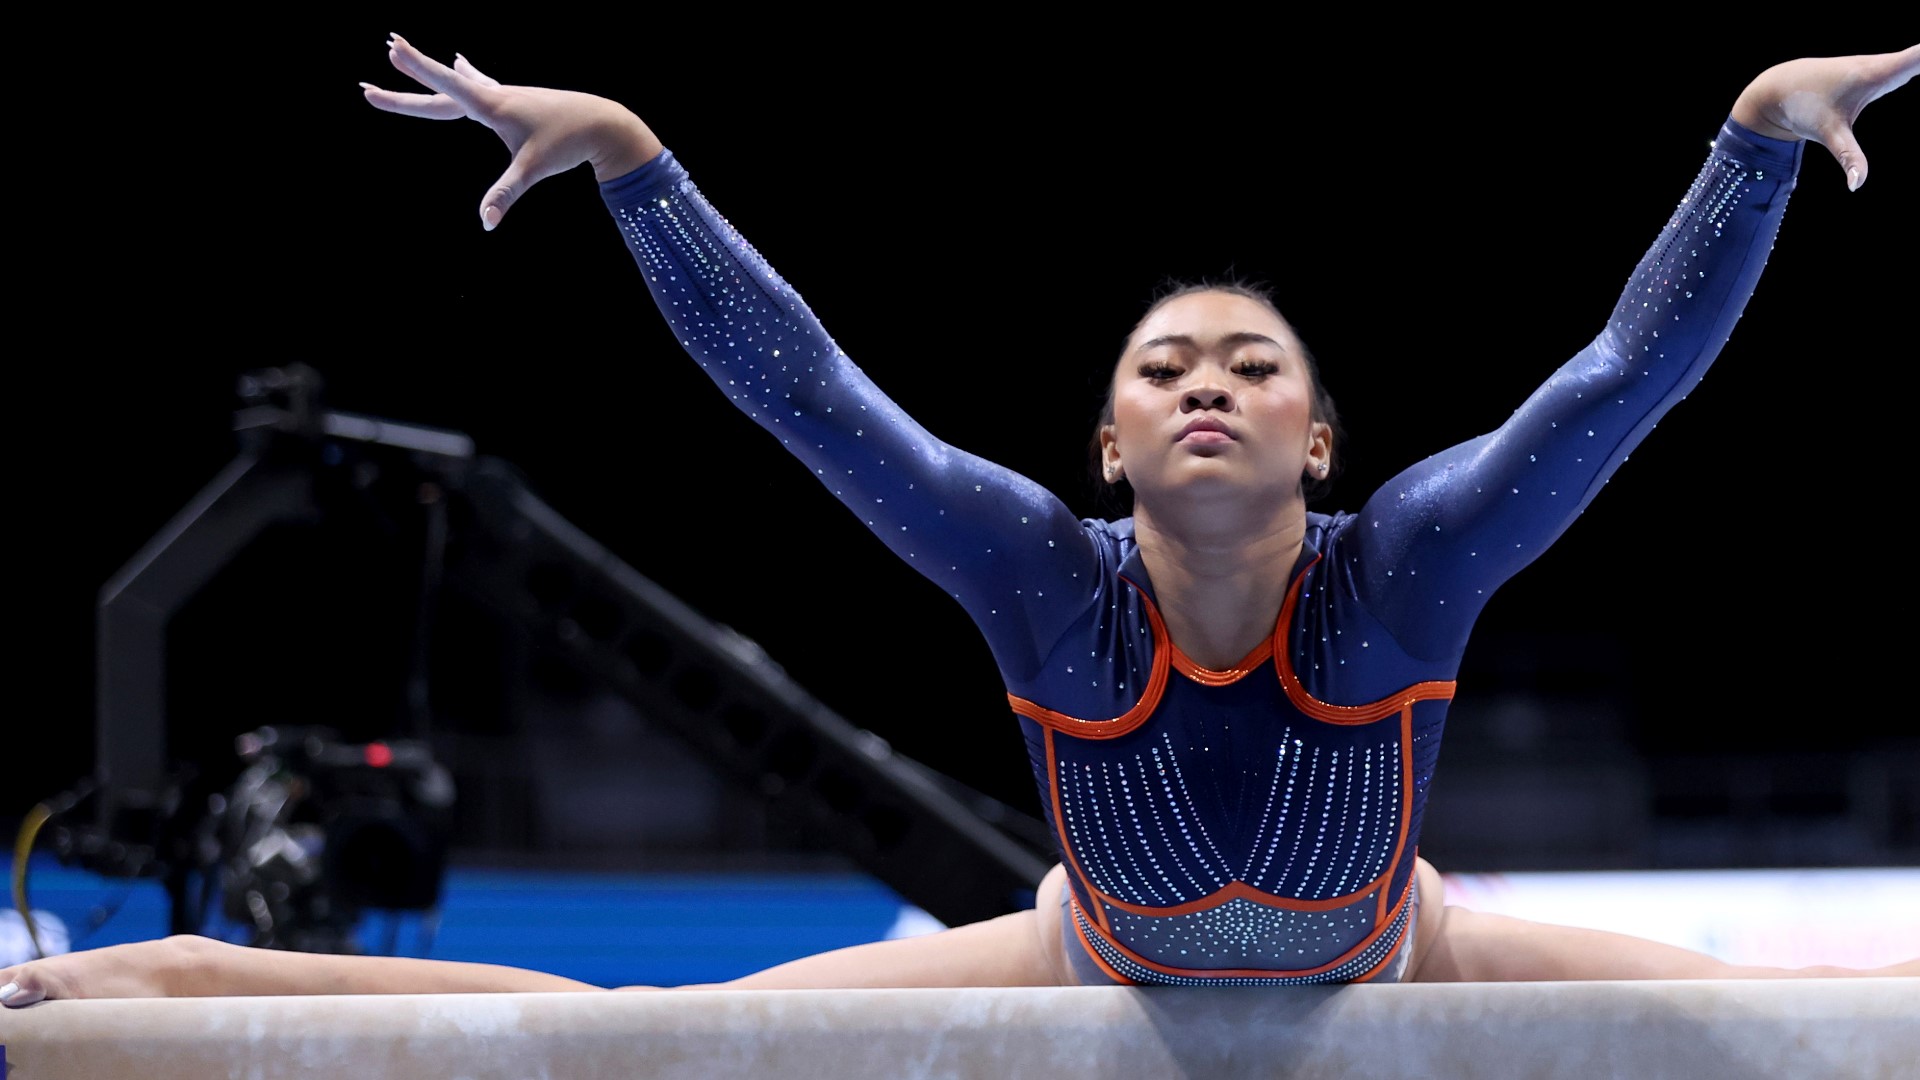 We're six months away from the 2024 Paris Olympics, and already athletes like Suni Lee are deep in training, with the gymnast showing off some of her new moves.